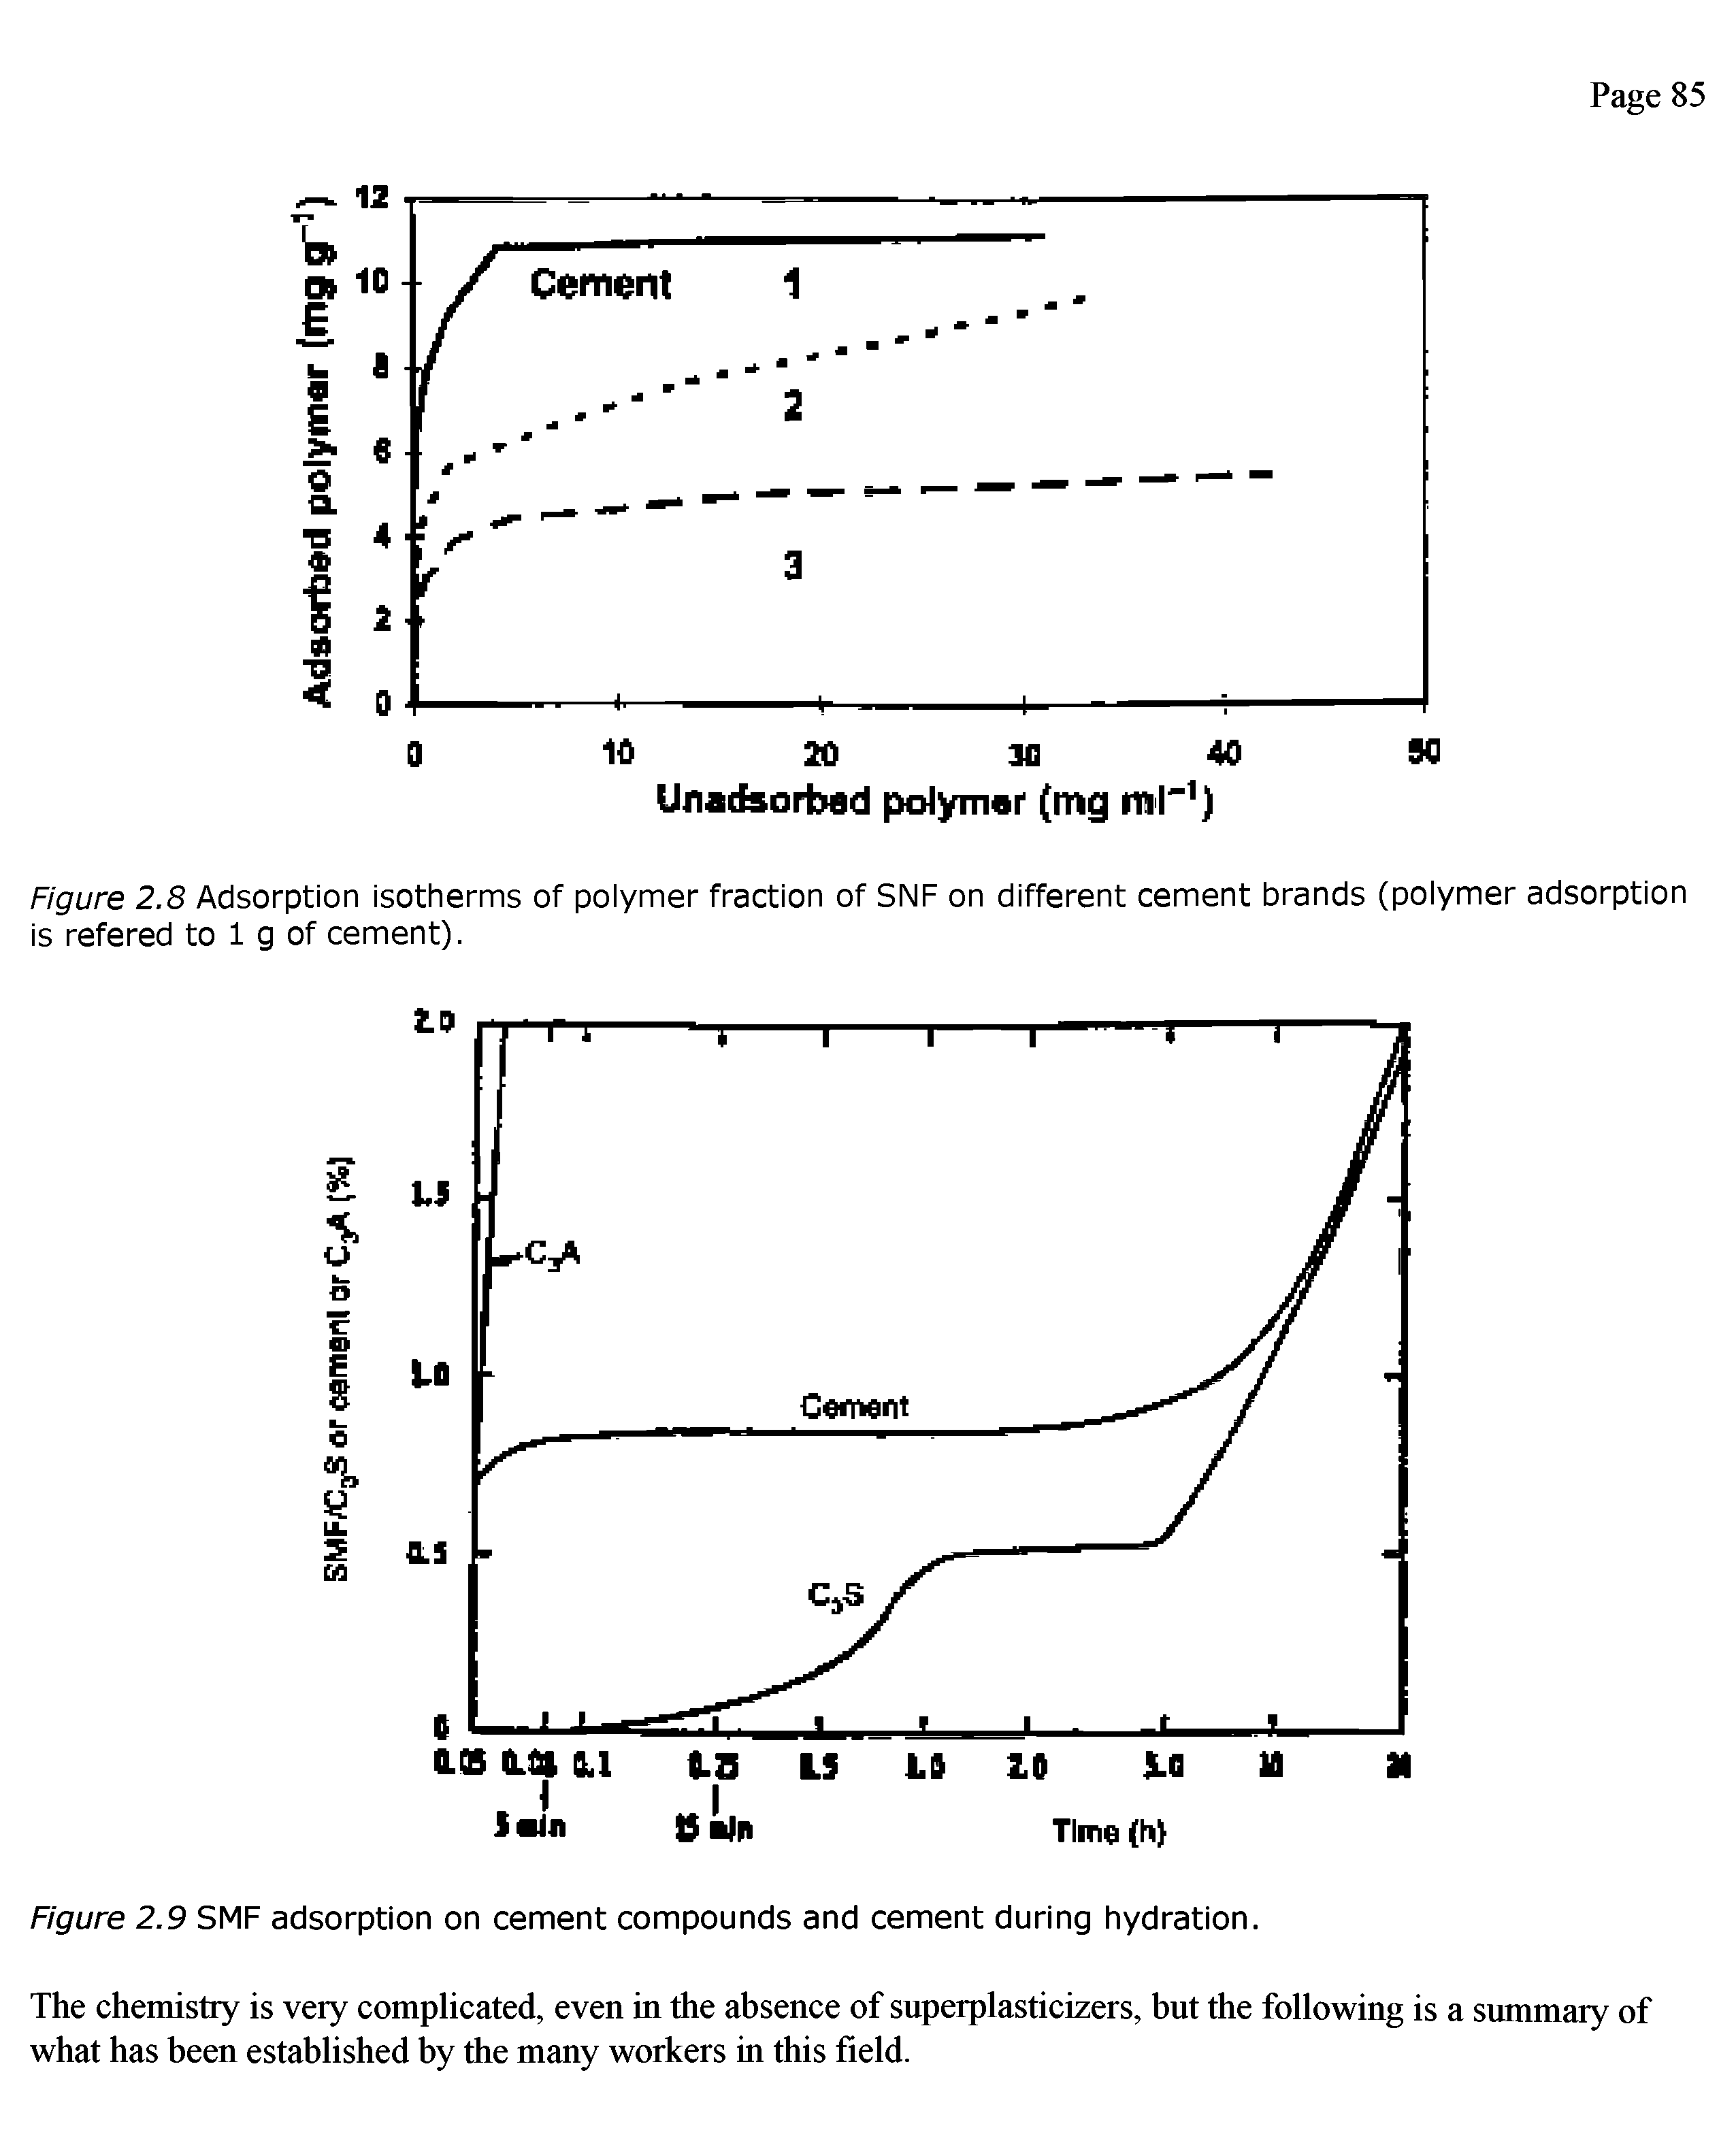 Figure 2.9 SMF adsorption on cement compounds and cement during hydration.